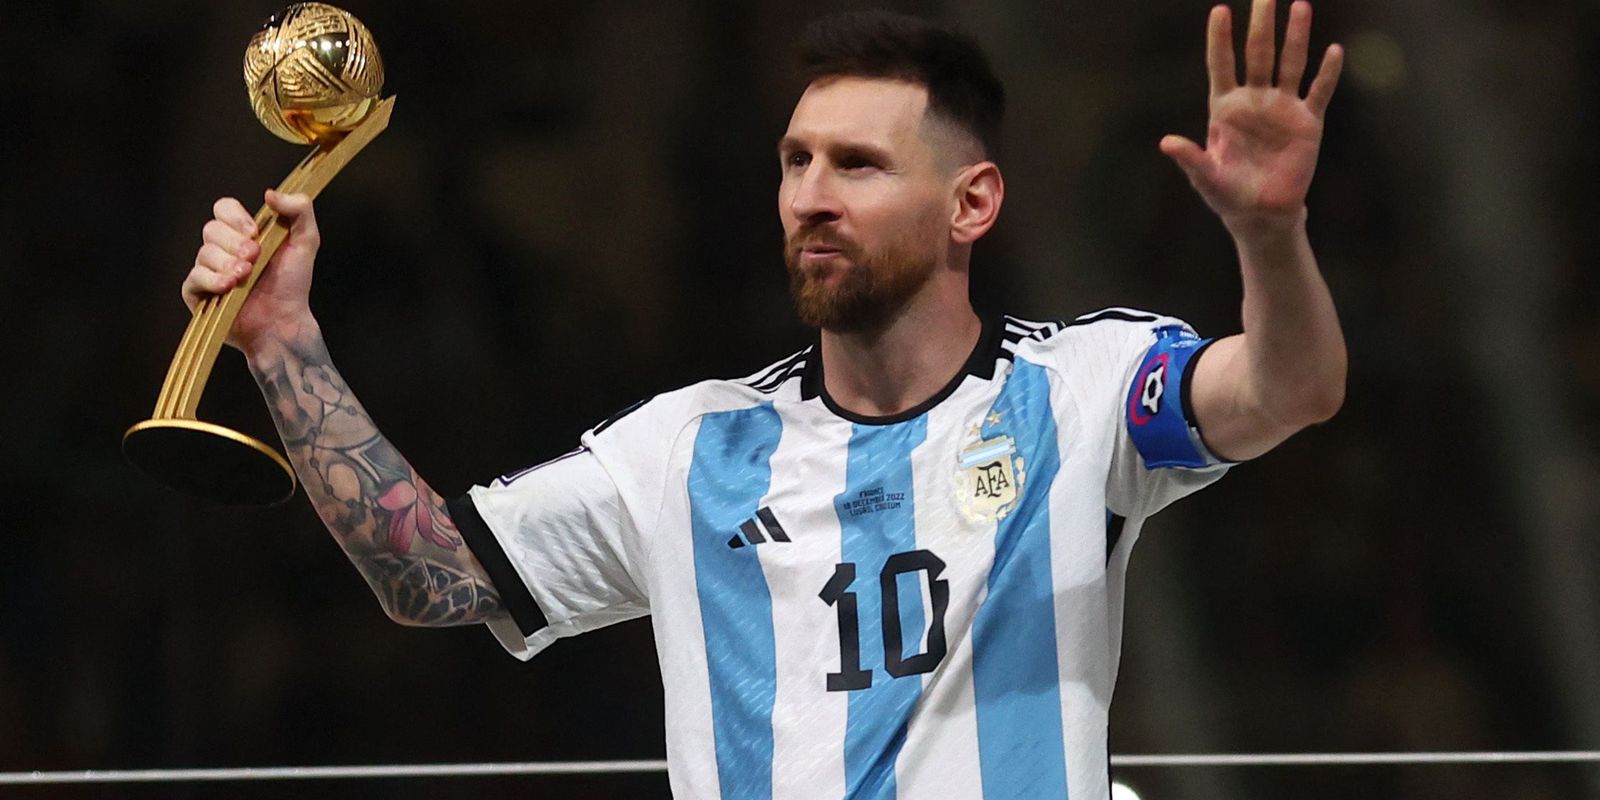 With Messi named star, Argentina dominates Qatar Cup awards